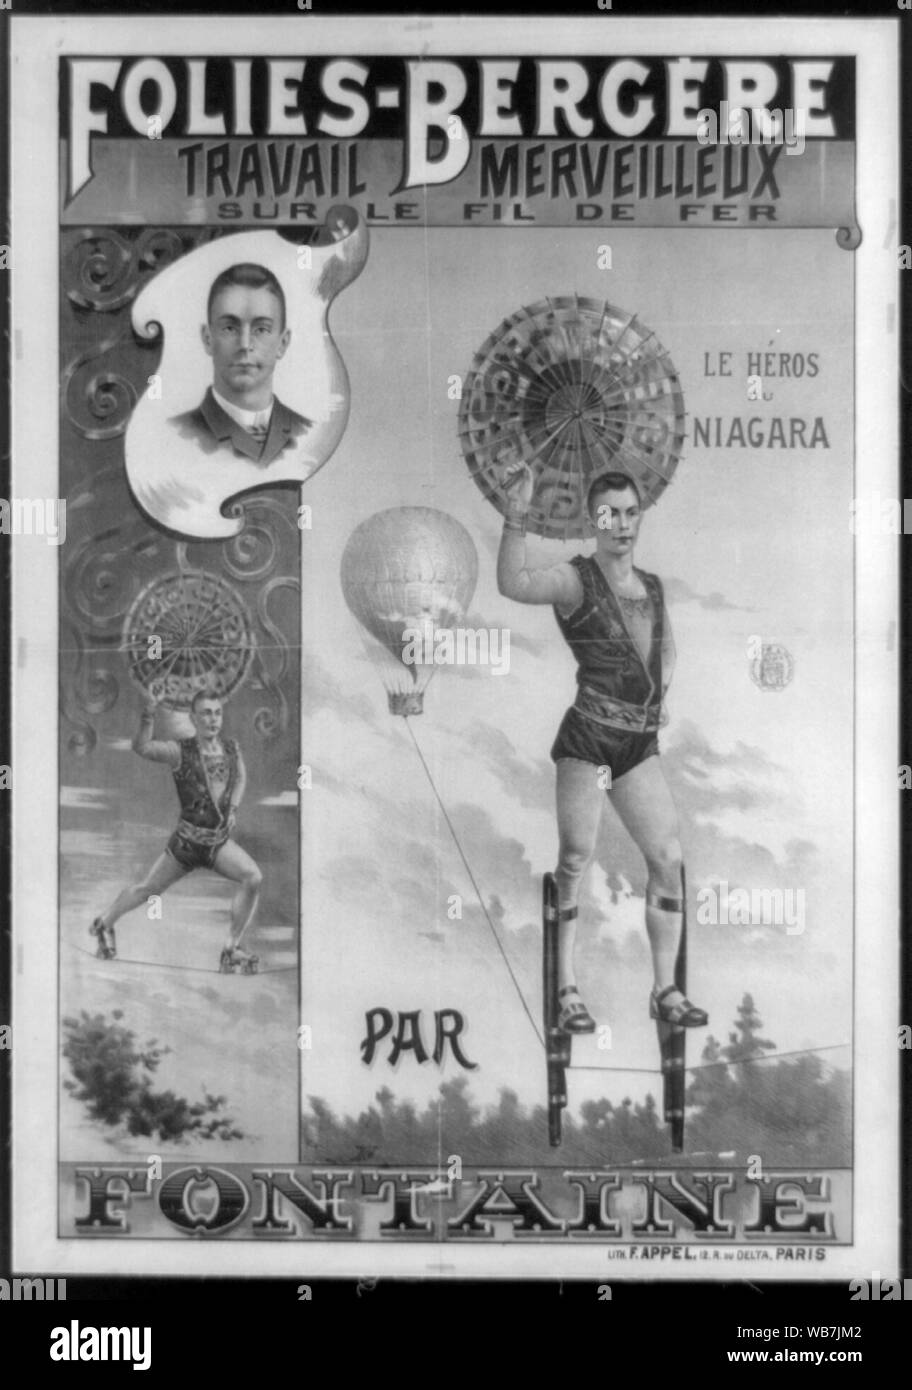 Folies-Bergère travail merveilleux sur le fil de fer par Fontaine; French poster shows aerialist Fontaine, labeled one of le héros du Niagara in three views: a small bust portrait, roller skating on a high wire, and walking on stilts on a high wire suspended by a balloon. Stock Photo